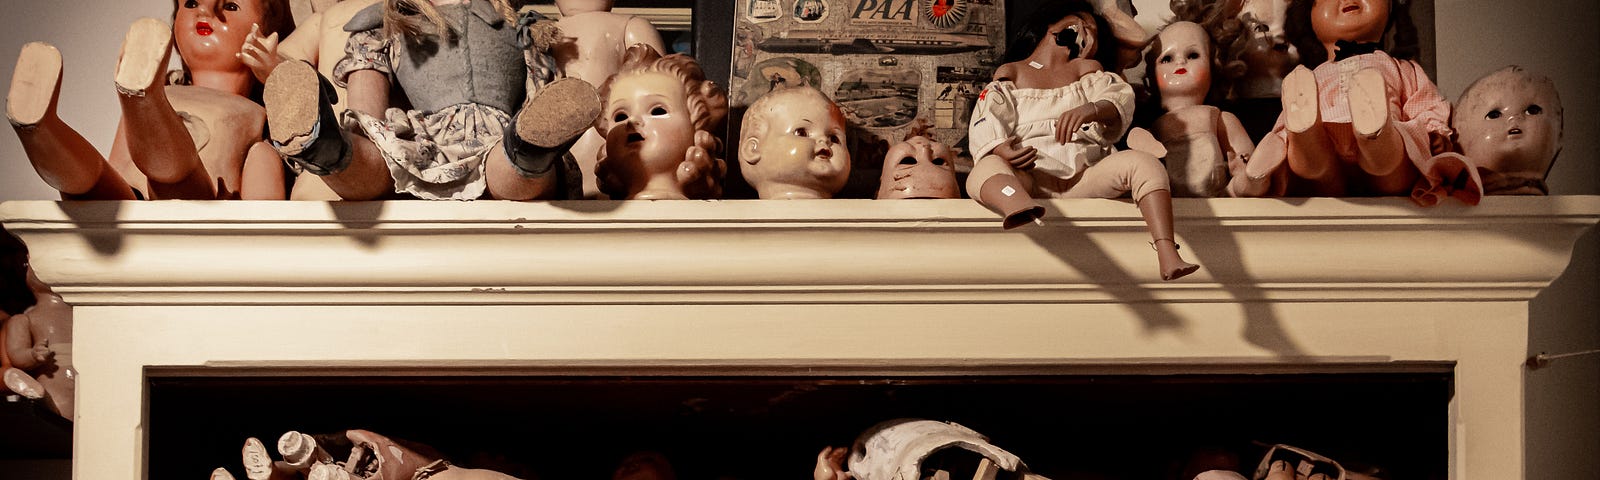 A collection of creepy porcelain dolls